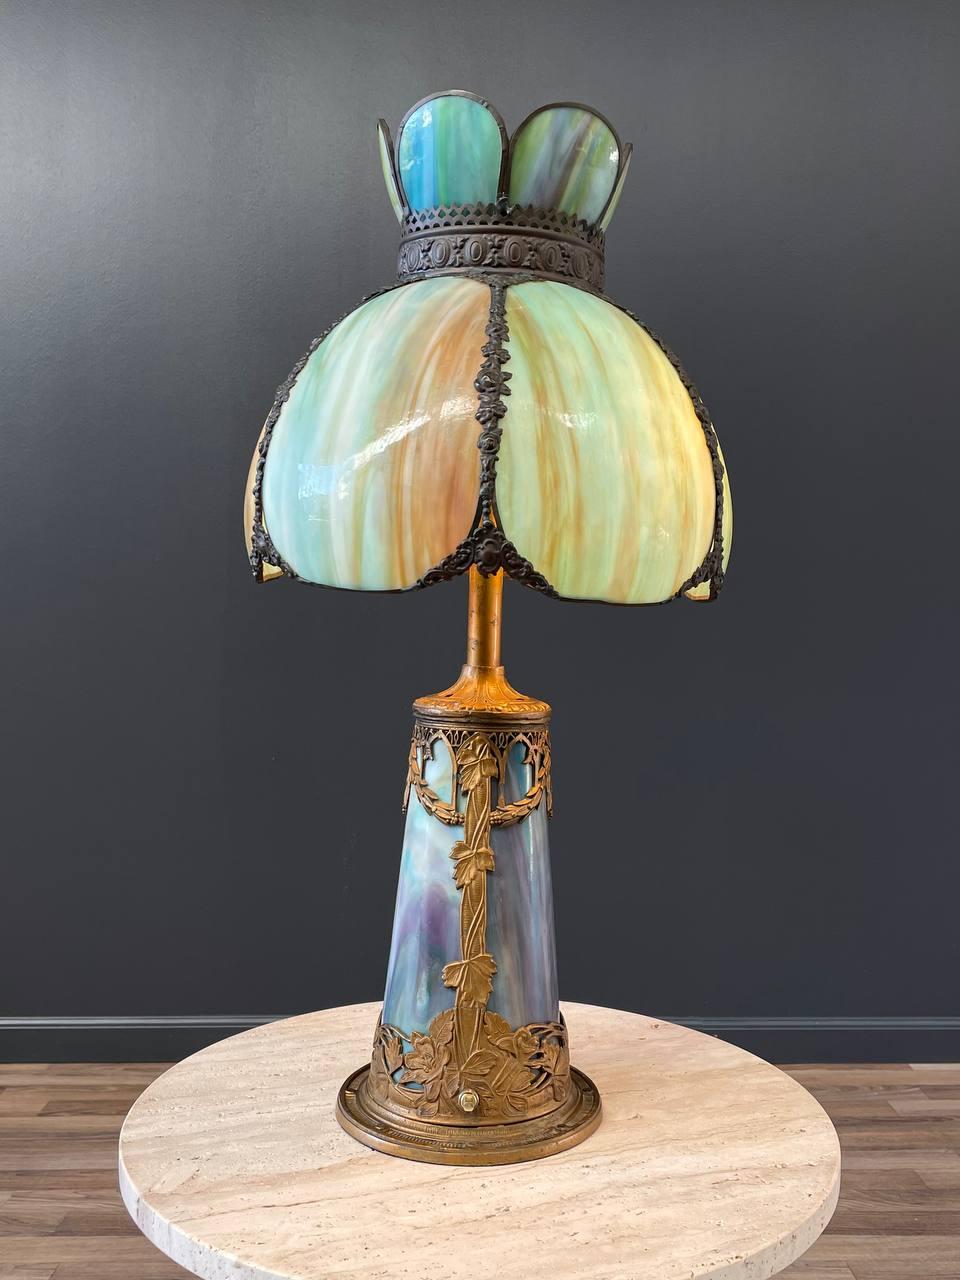 Original Vintage Condition

Dimensions: 25”H x 12”W x 12”D

Materials: Patinated Brass, Resin Plastic Shade